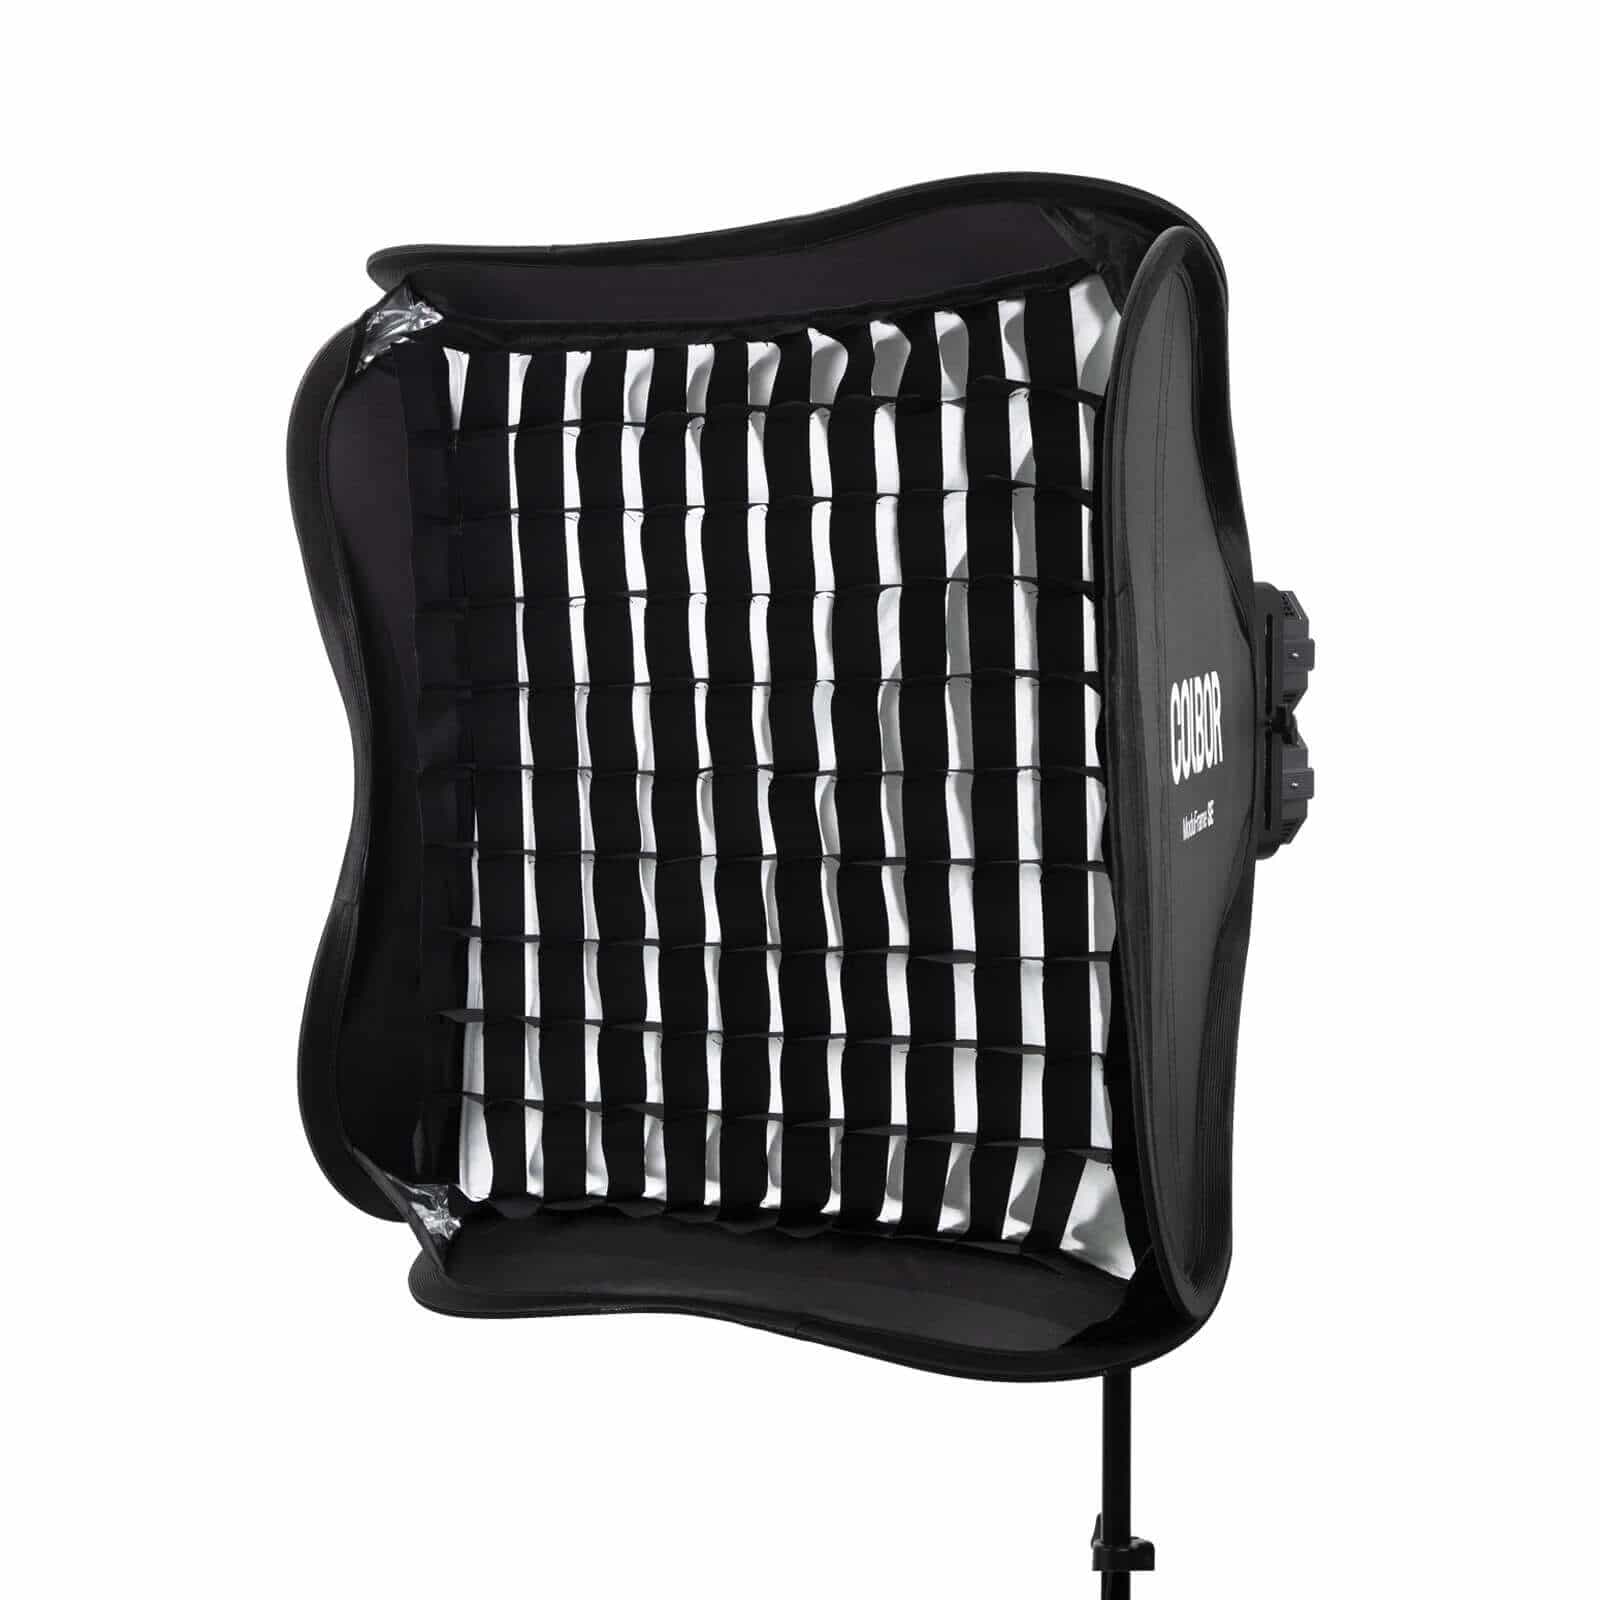 COLBOR ModuFrame SE 60x60 softbox comes with a grid.